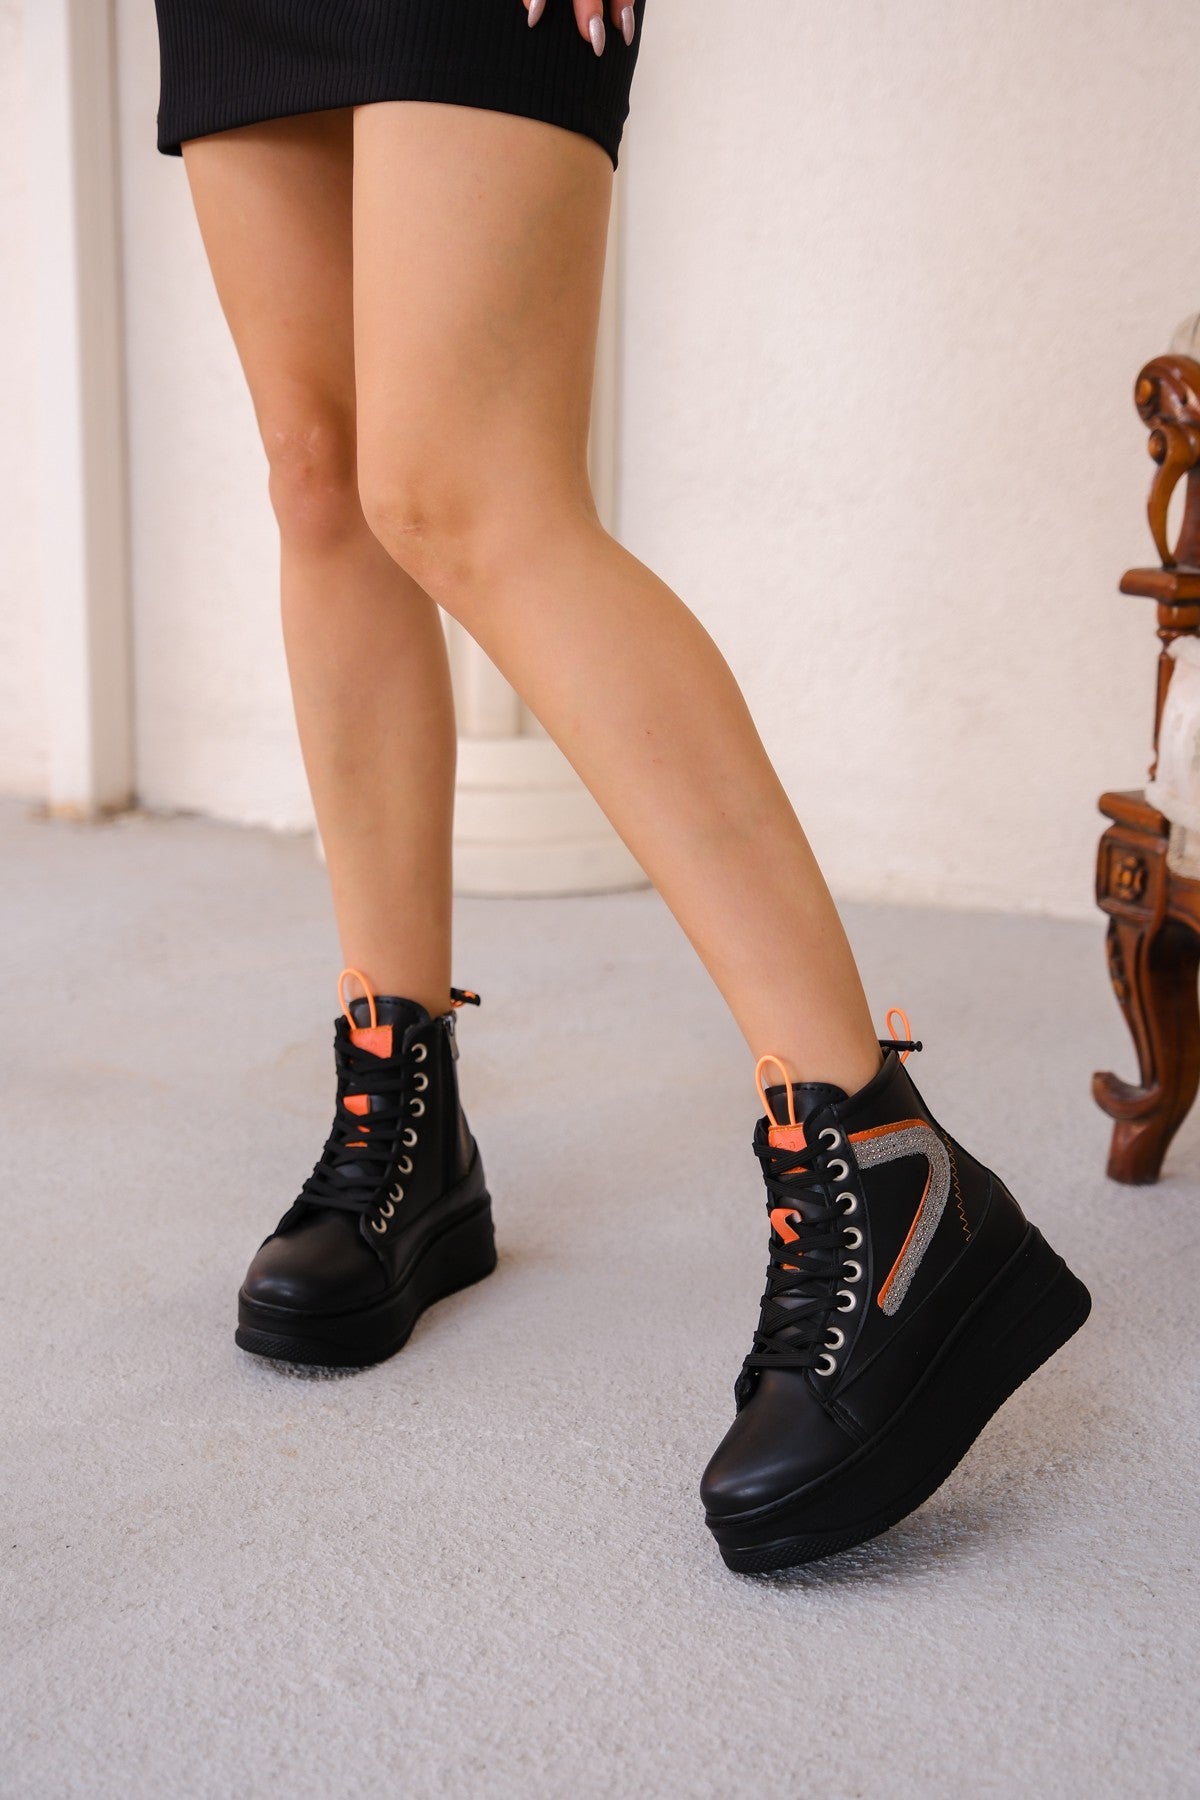 Women's Pone Black Skin Orange Detailed Lace Up Sneakers Boots - STREETMODE ™